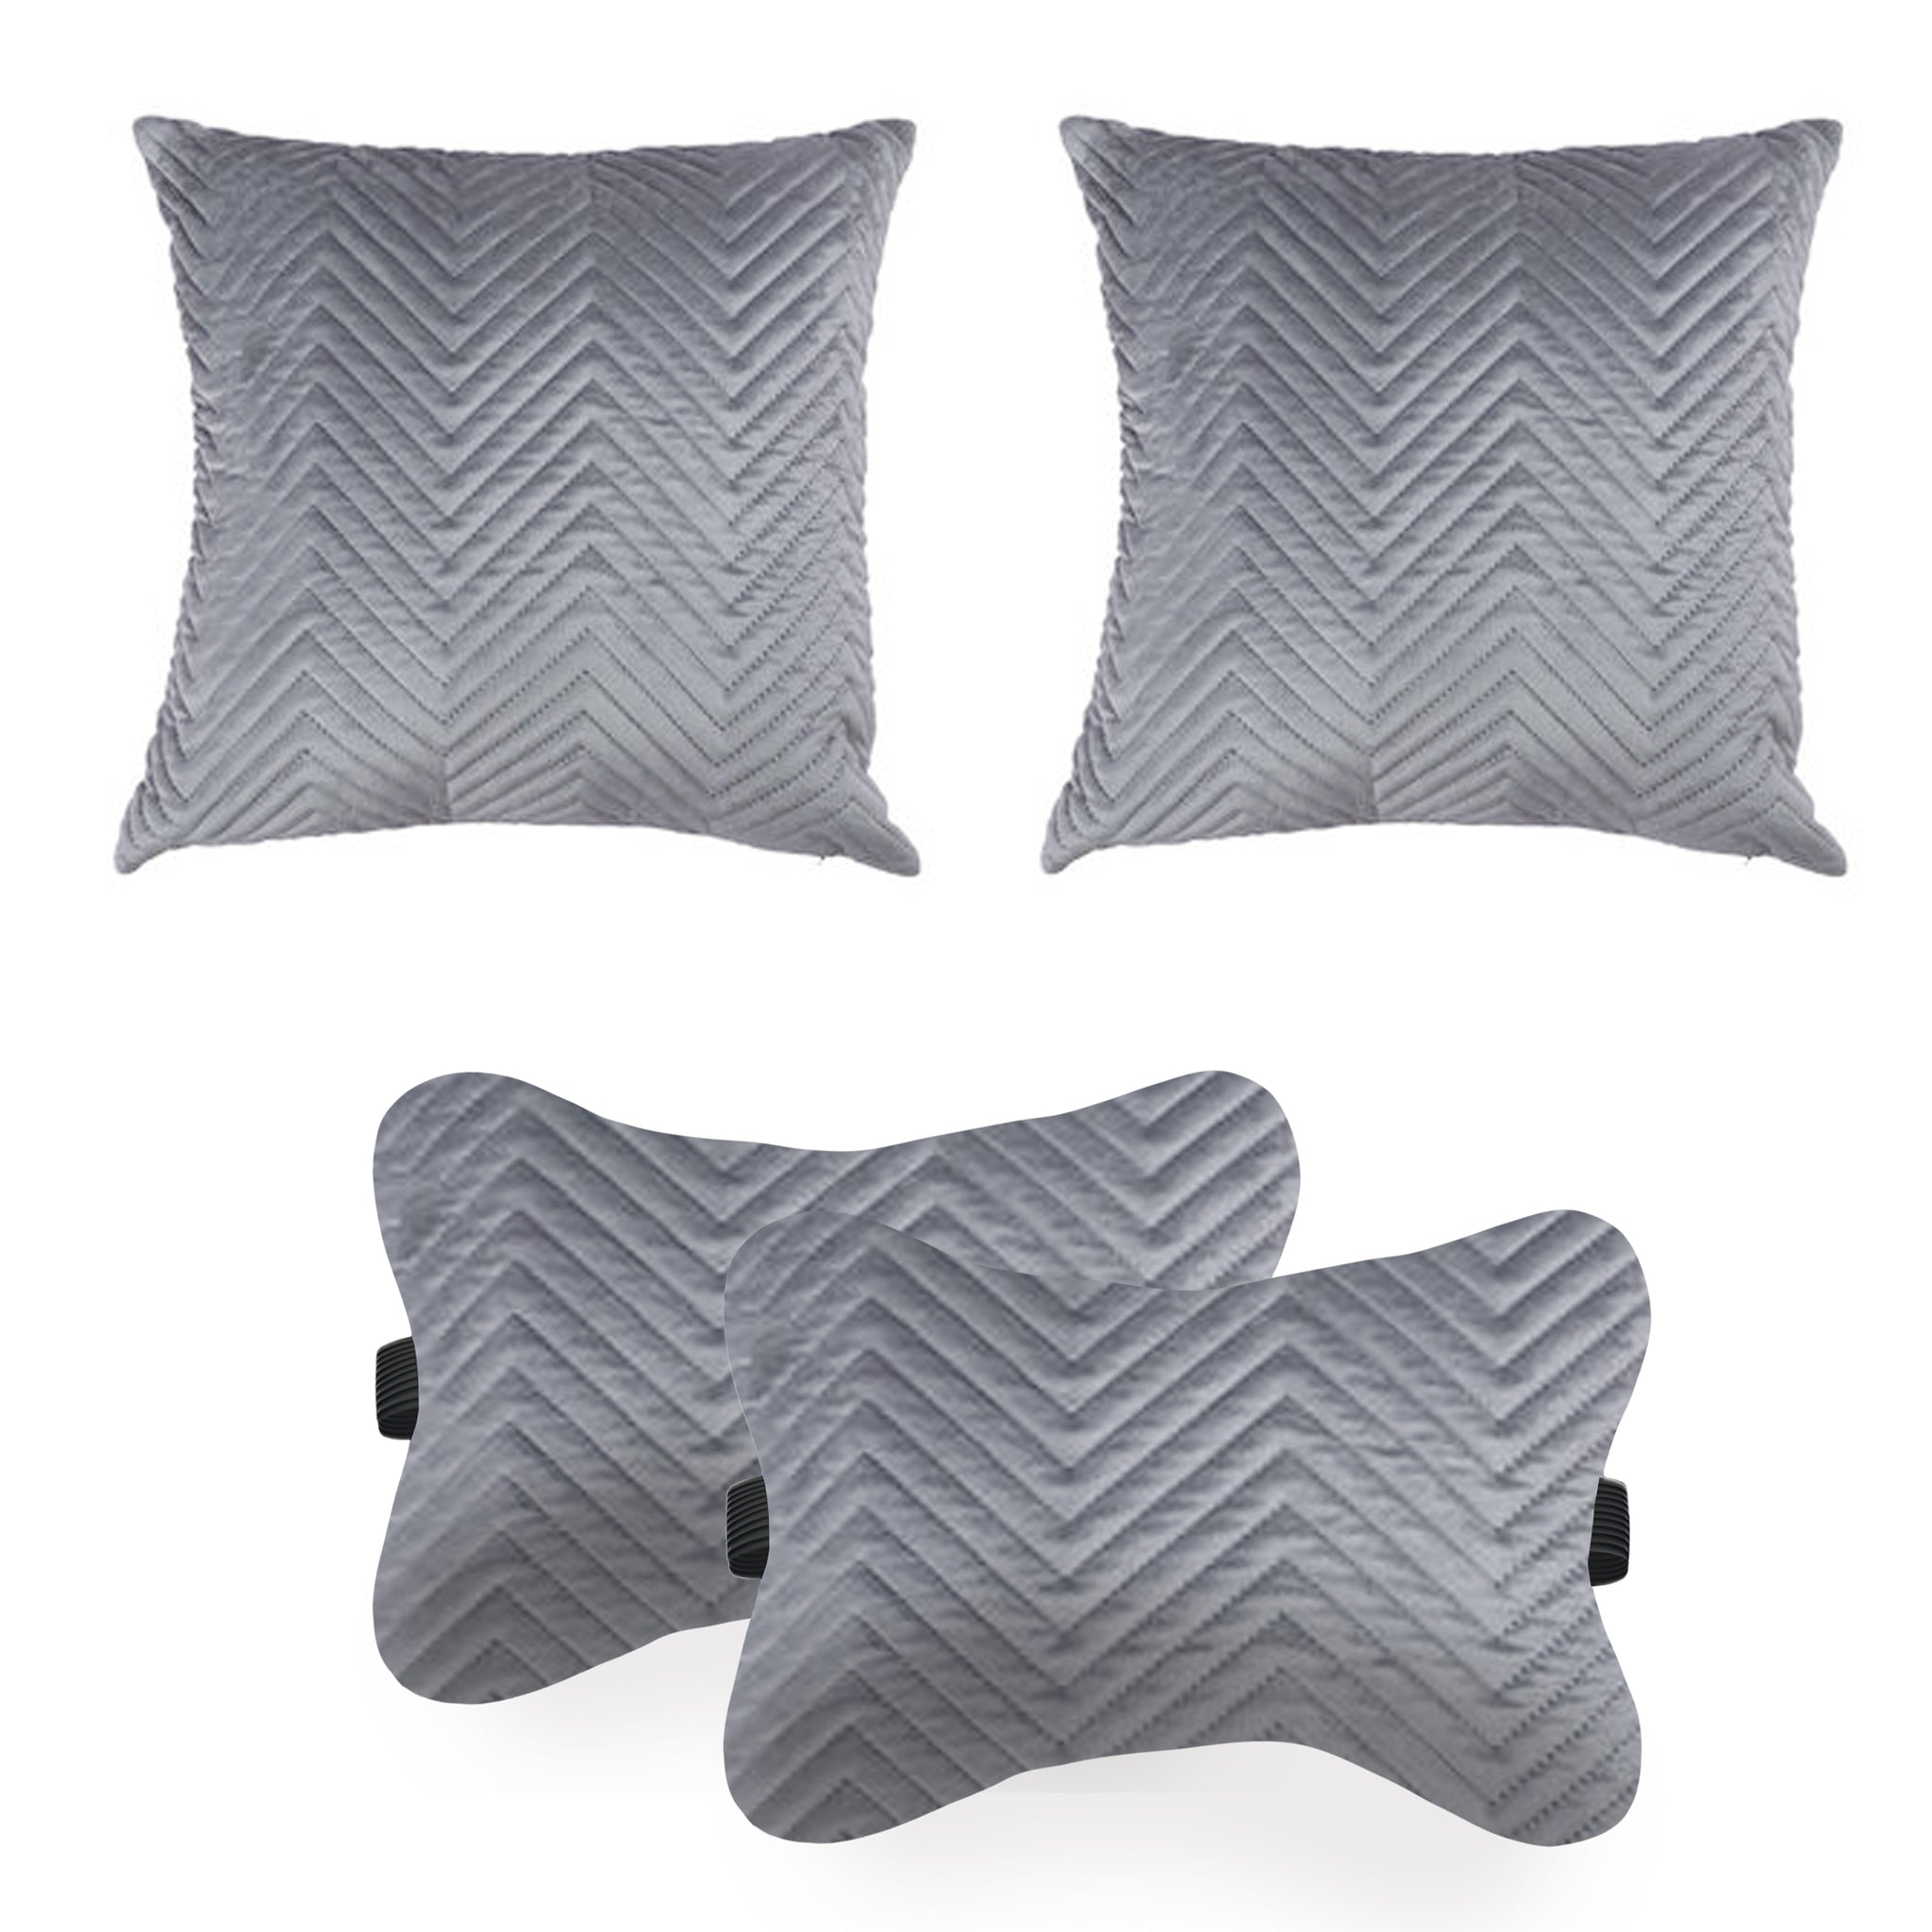 Car Cushion Pillows for Neck, Back and Seat Rest, Pack of 4, Quilted Grey Velvet Material, 2 PCs of Bone Neck Rest Size: 6x10 Inches, 2 Pcs of Car Cushion Size: 12x12 Inches by Lushomes